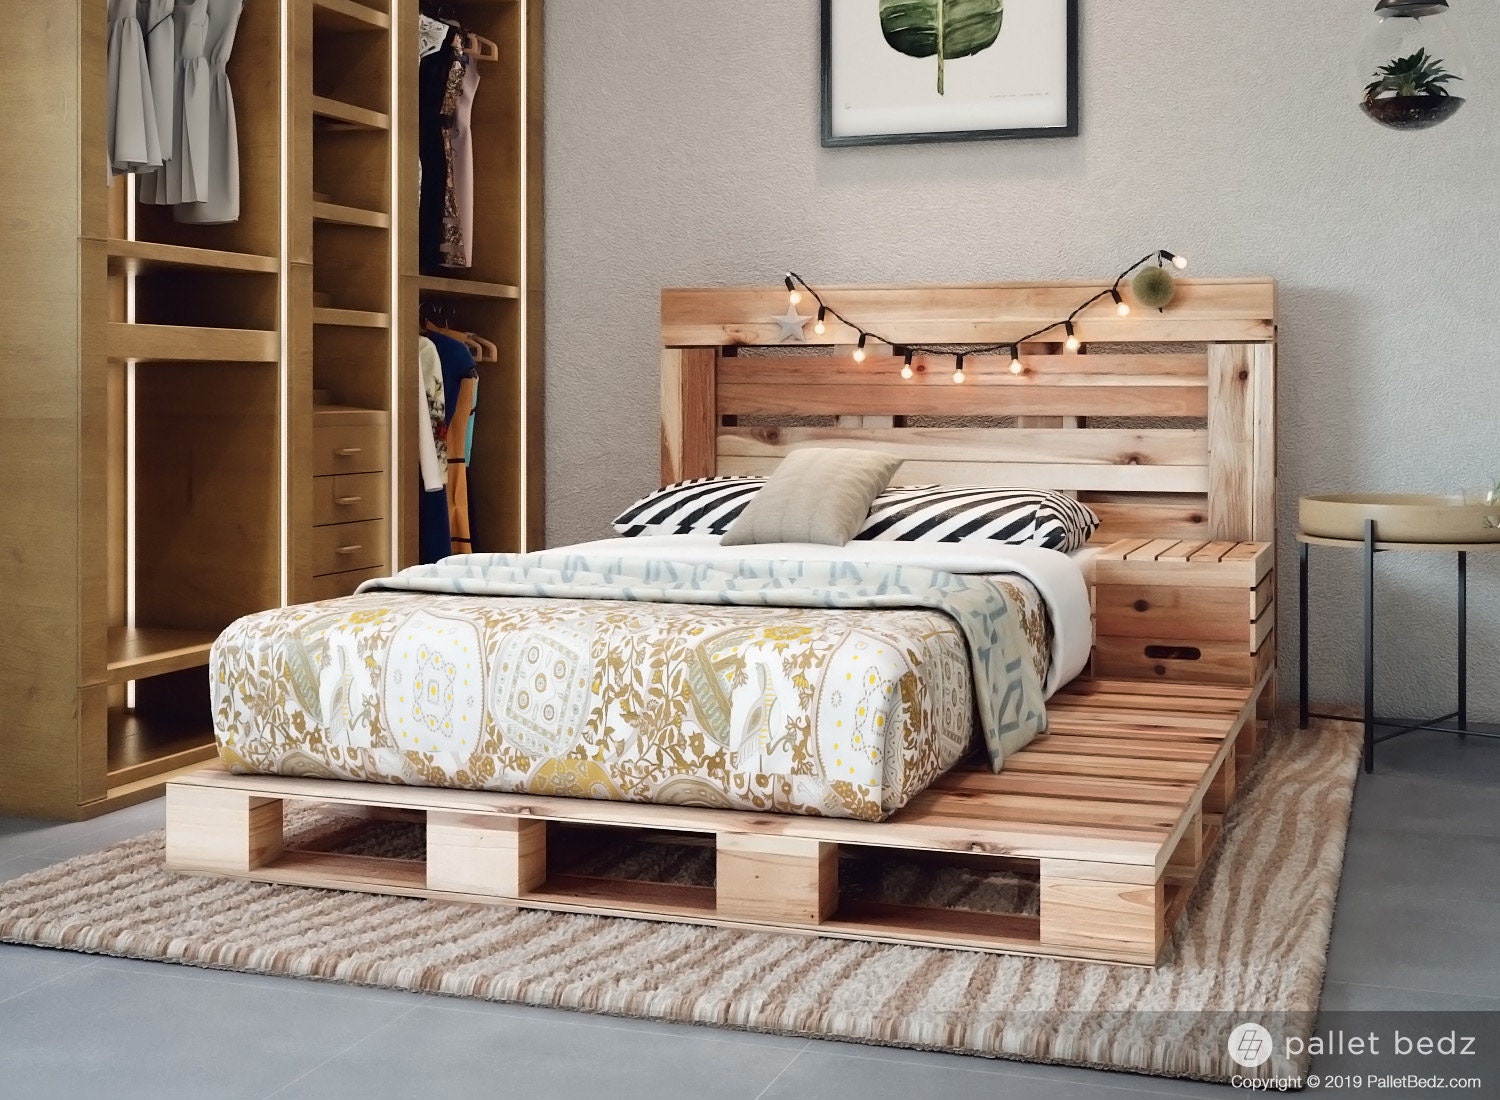 Pallet Bed The Twin Size Includes, Twin Size Pallet Bed Frame